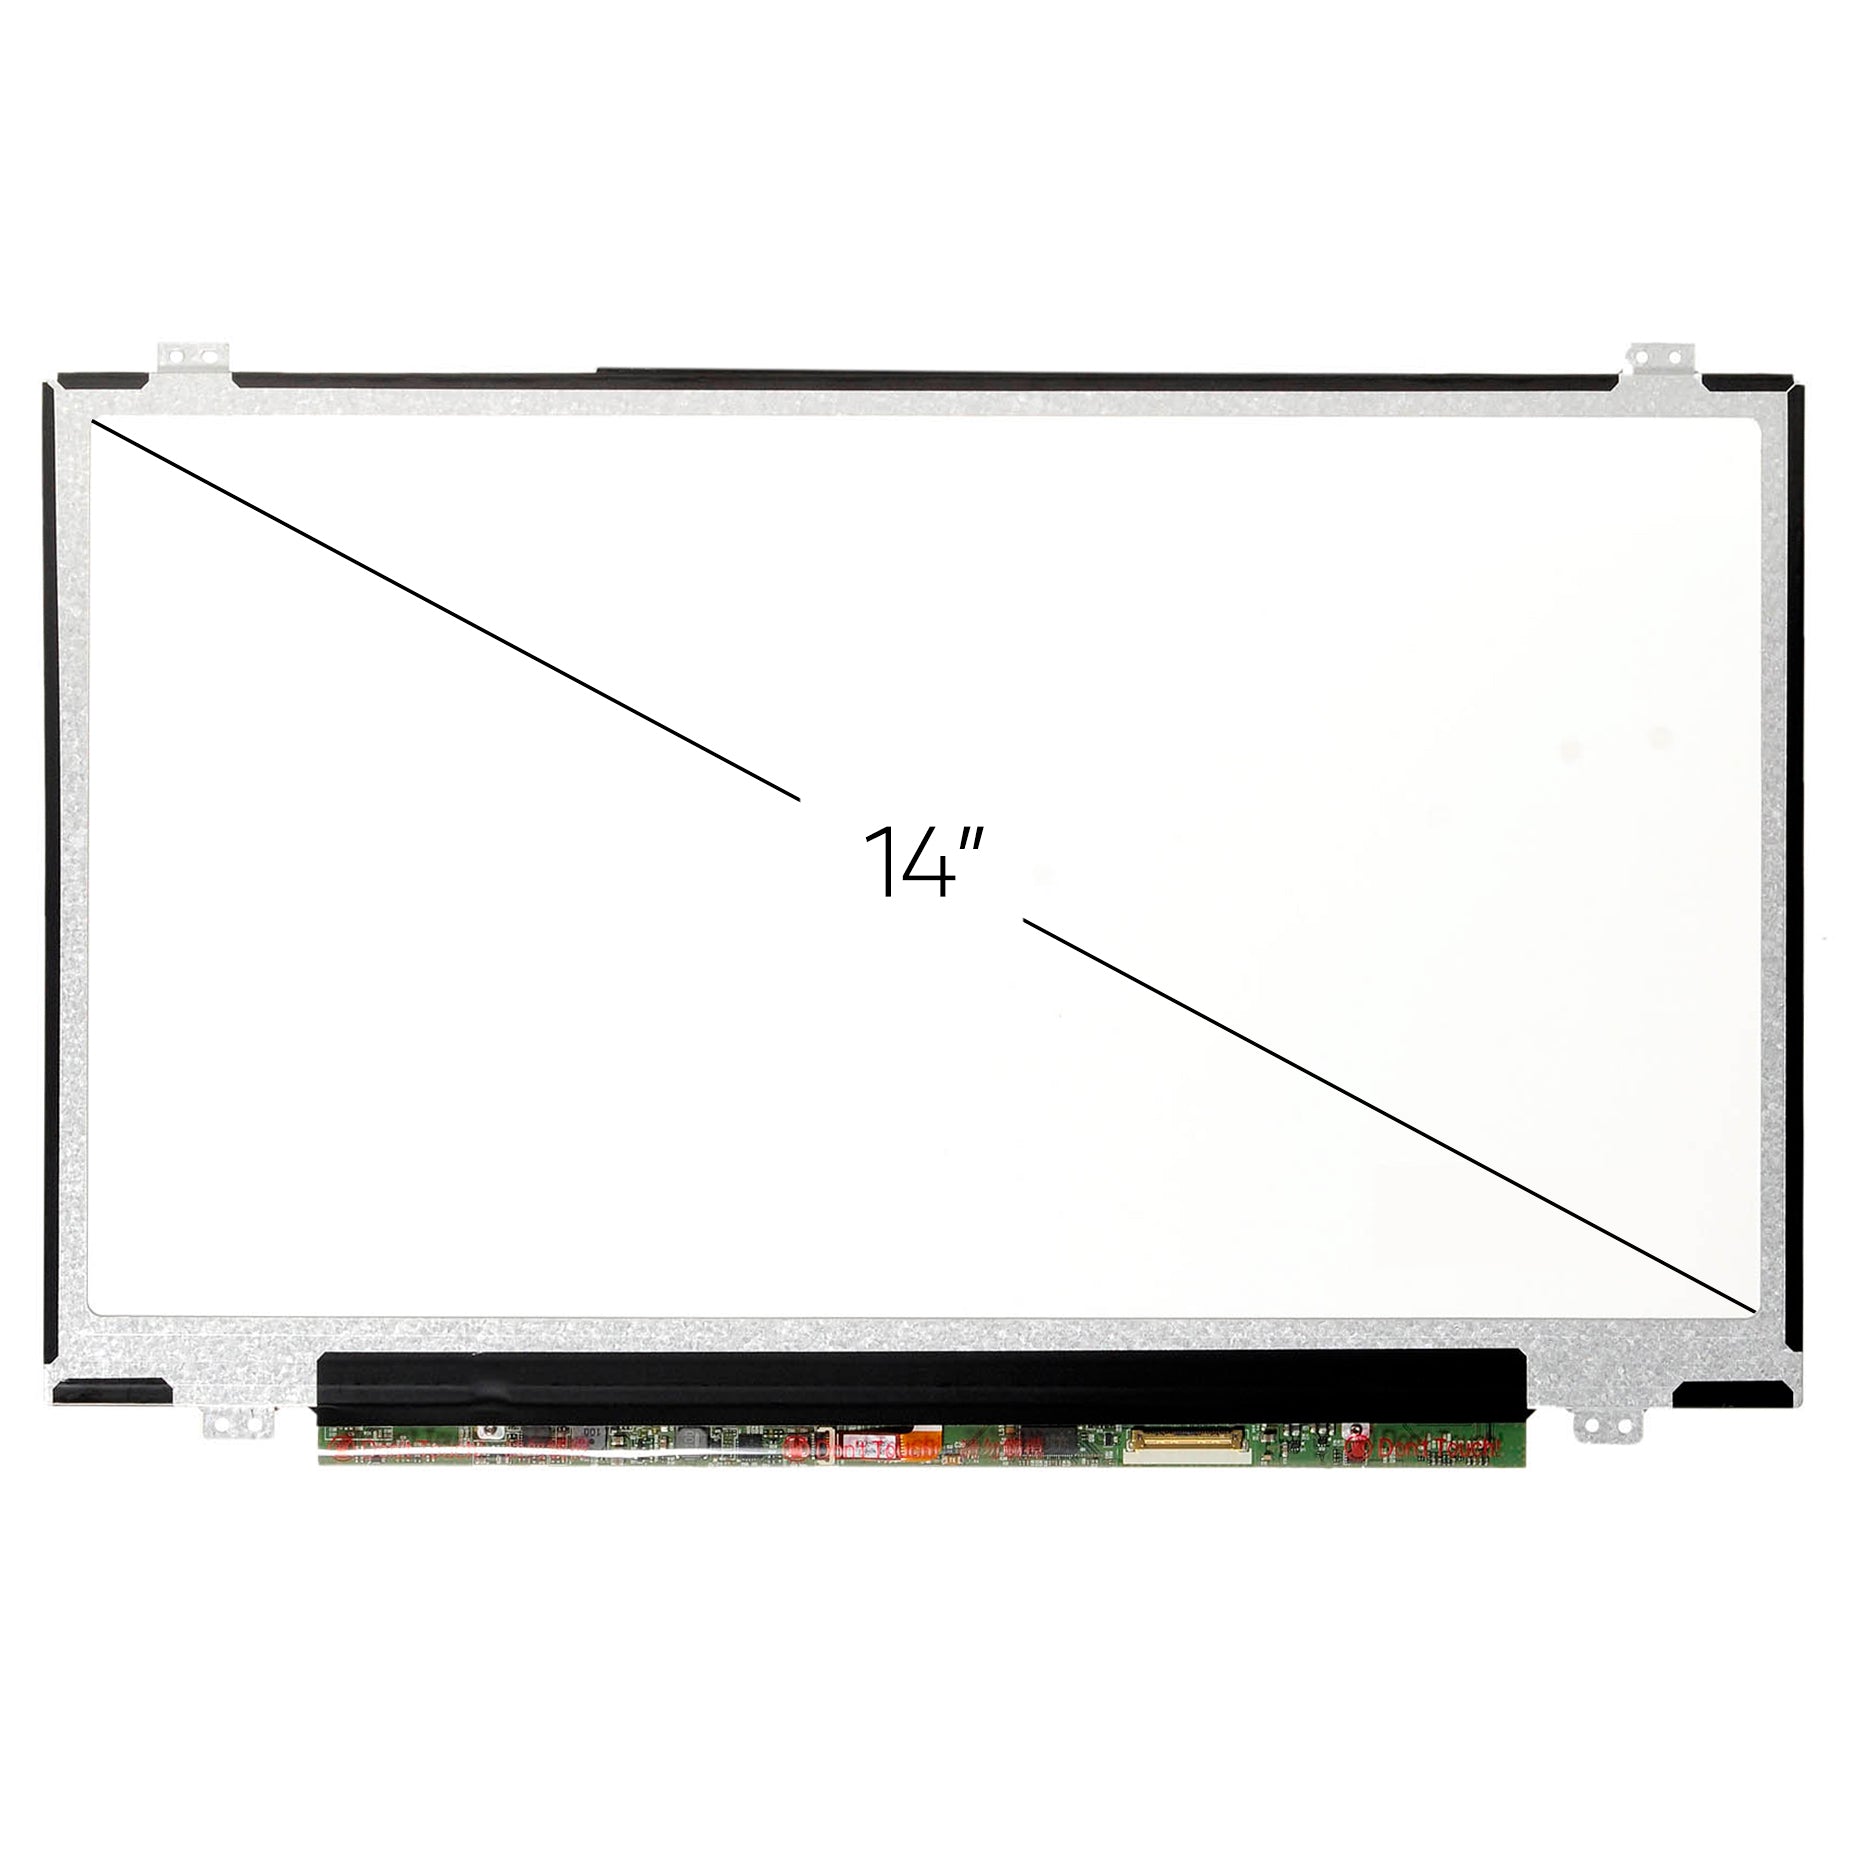 Screen Replacement for HP Probook 645 G1 FHD 1920x1080 IPS Matte LCD LED Display